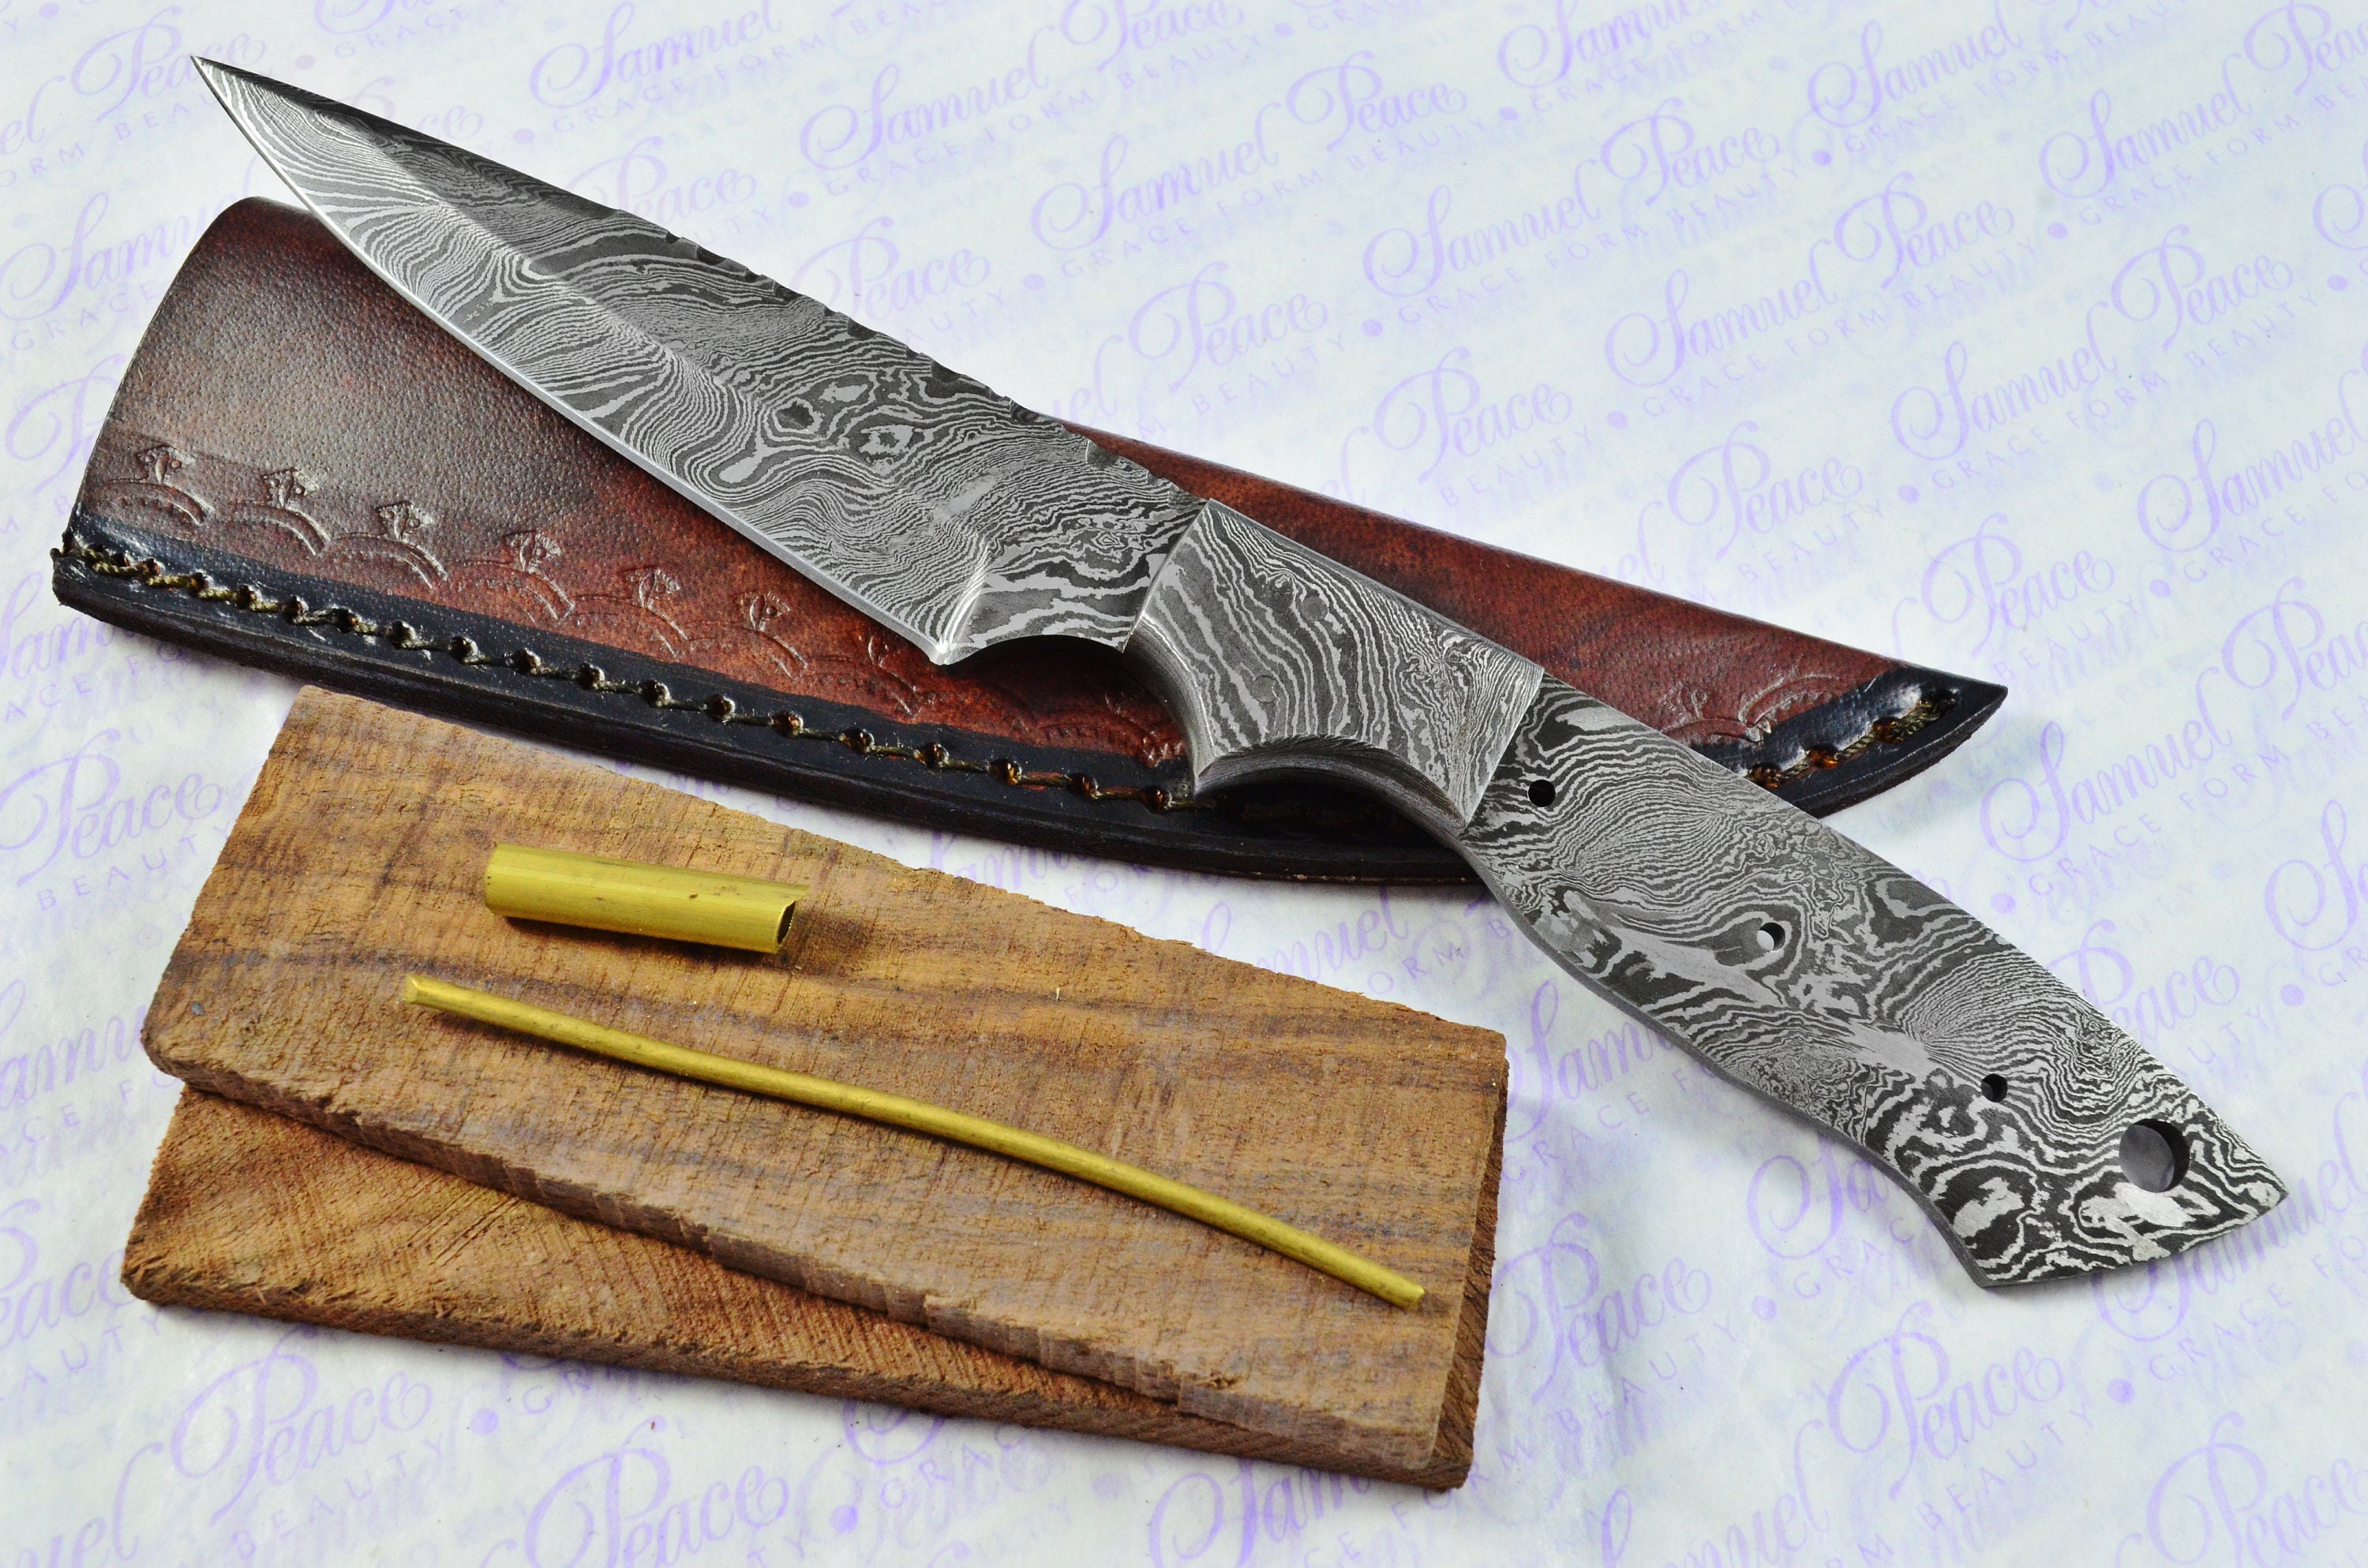 Damascus Knife Making Kit DIY Handmade Damascus Steel Includes Blank Blade,  Pins, Leather Sheath, Handle Scales Knife Making Supplies NB108 